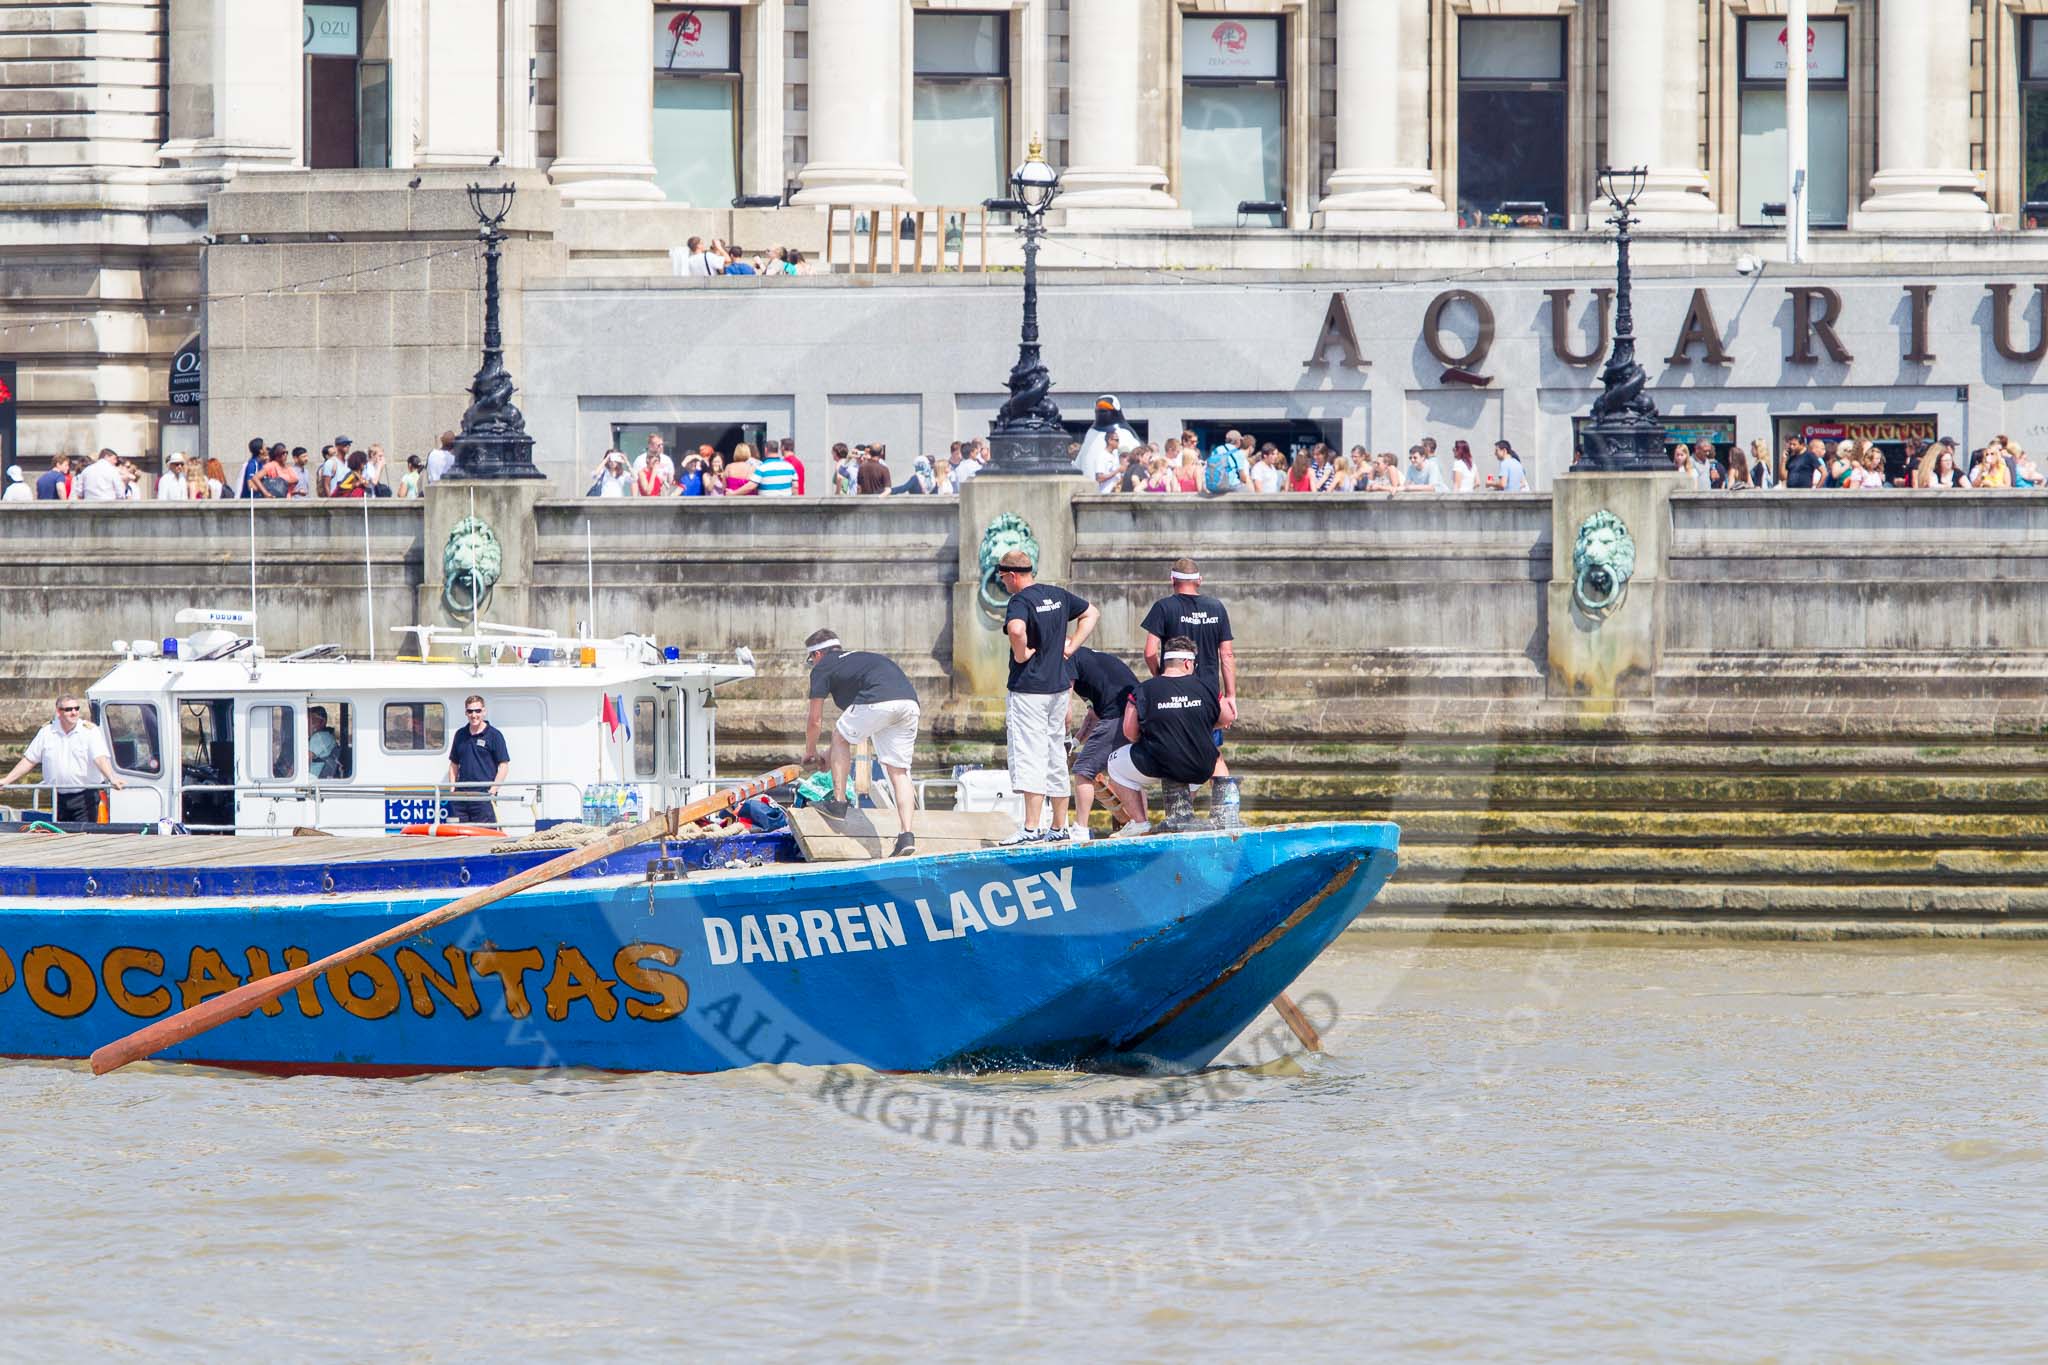 TOW River Thames Barge Driving Race 2013: Barge "Darren Lacey", by Princess Pocahontas, at the London Eye and London Aquarium, close to the race finish at Westminster Bridge..
River Thames between Greenwich and Westminster,
London,

United Kingdom,
on 13 July 2013 at 14:30, image #477